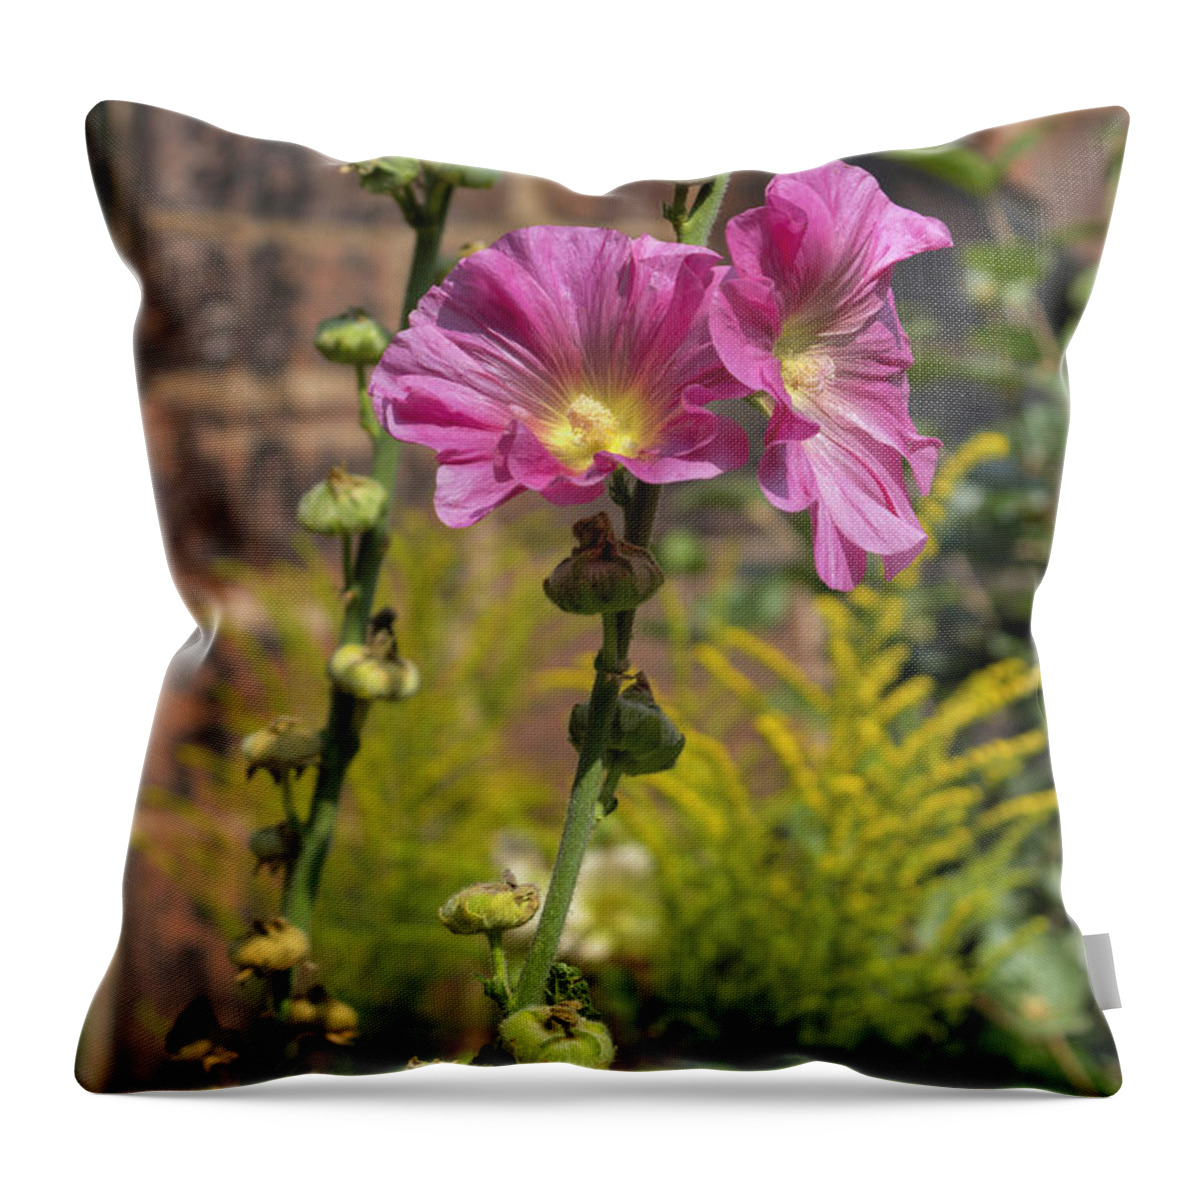 Flower Throw Pillow featuring the photograph Summer Hollyhocks by Ian Mitchell